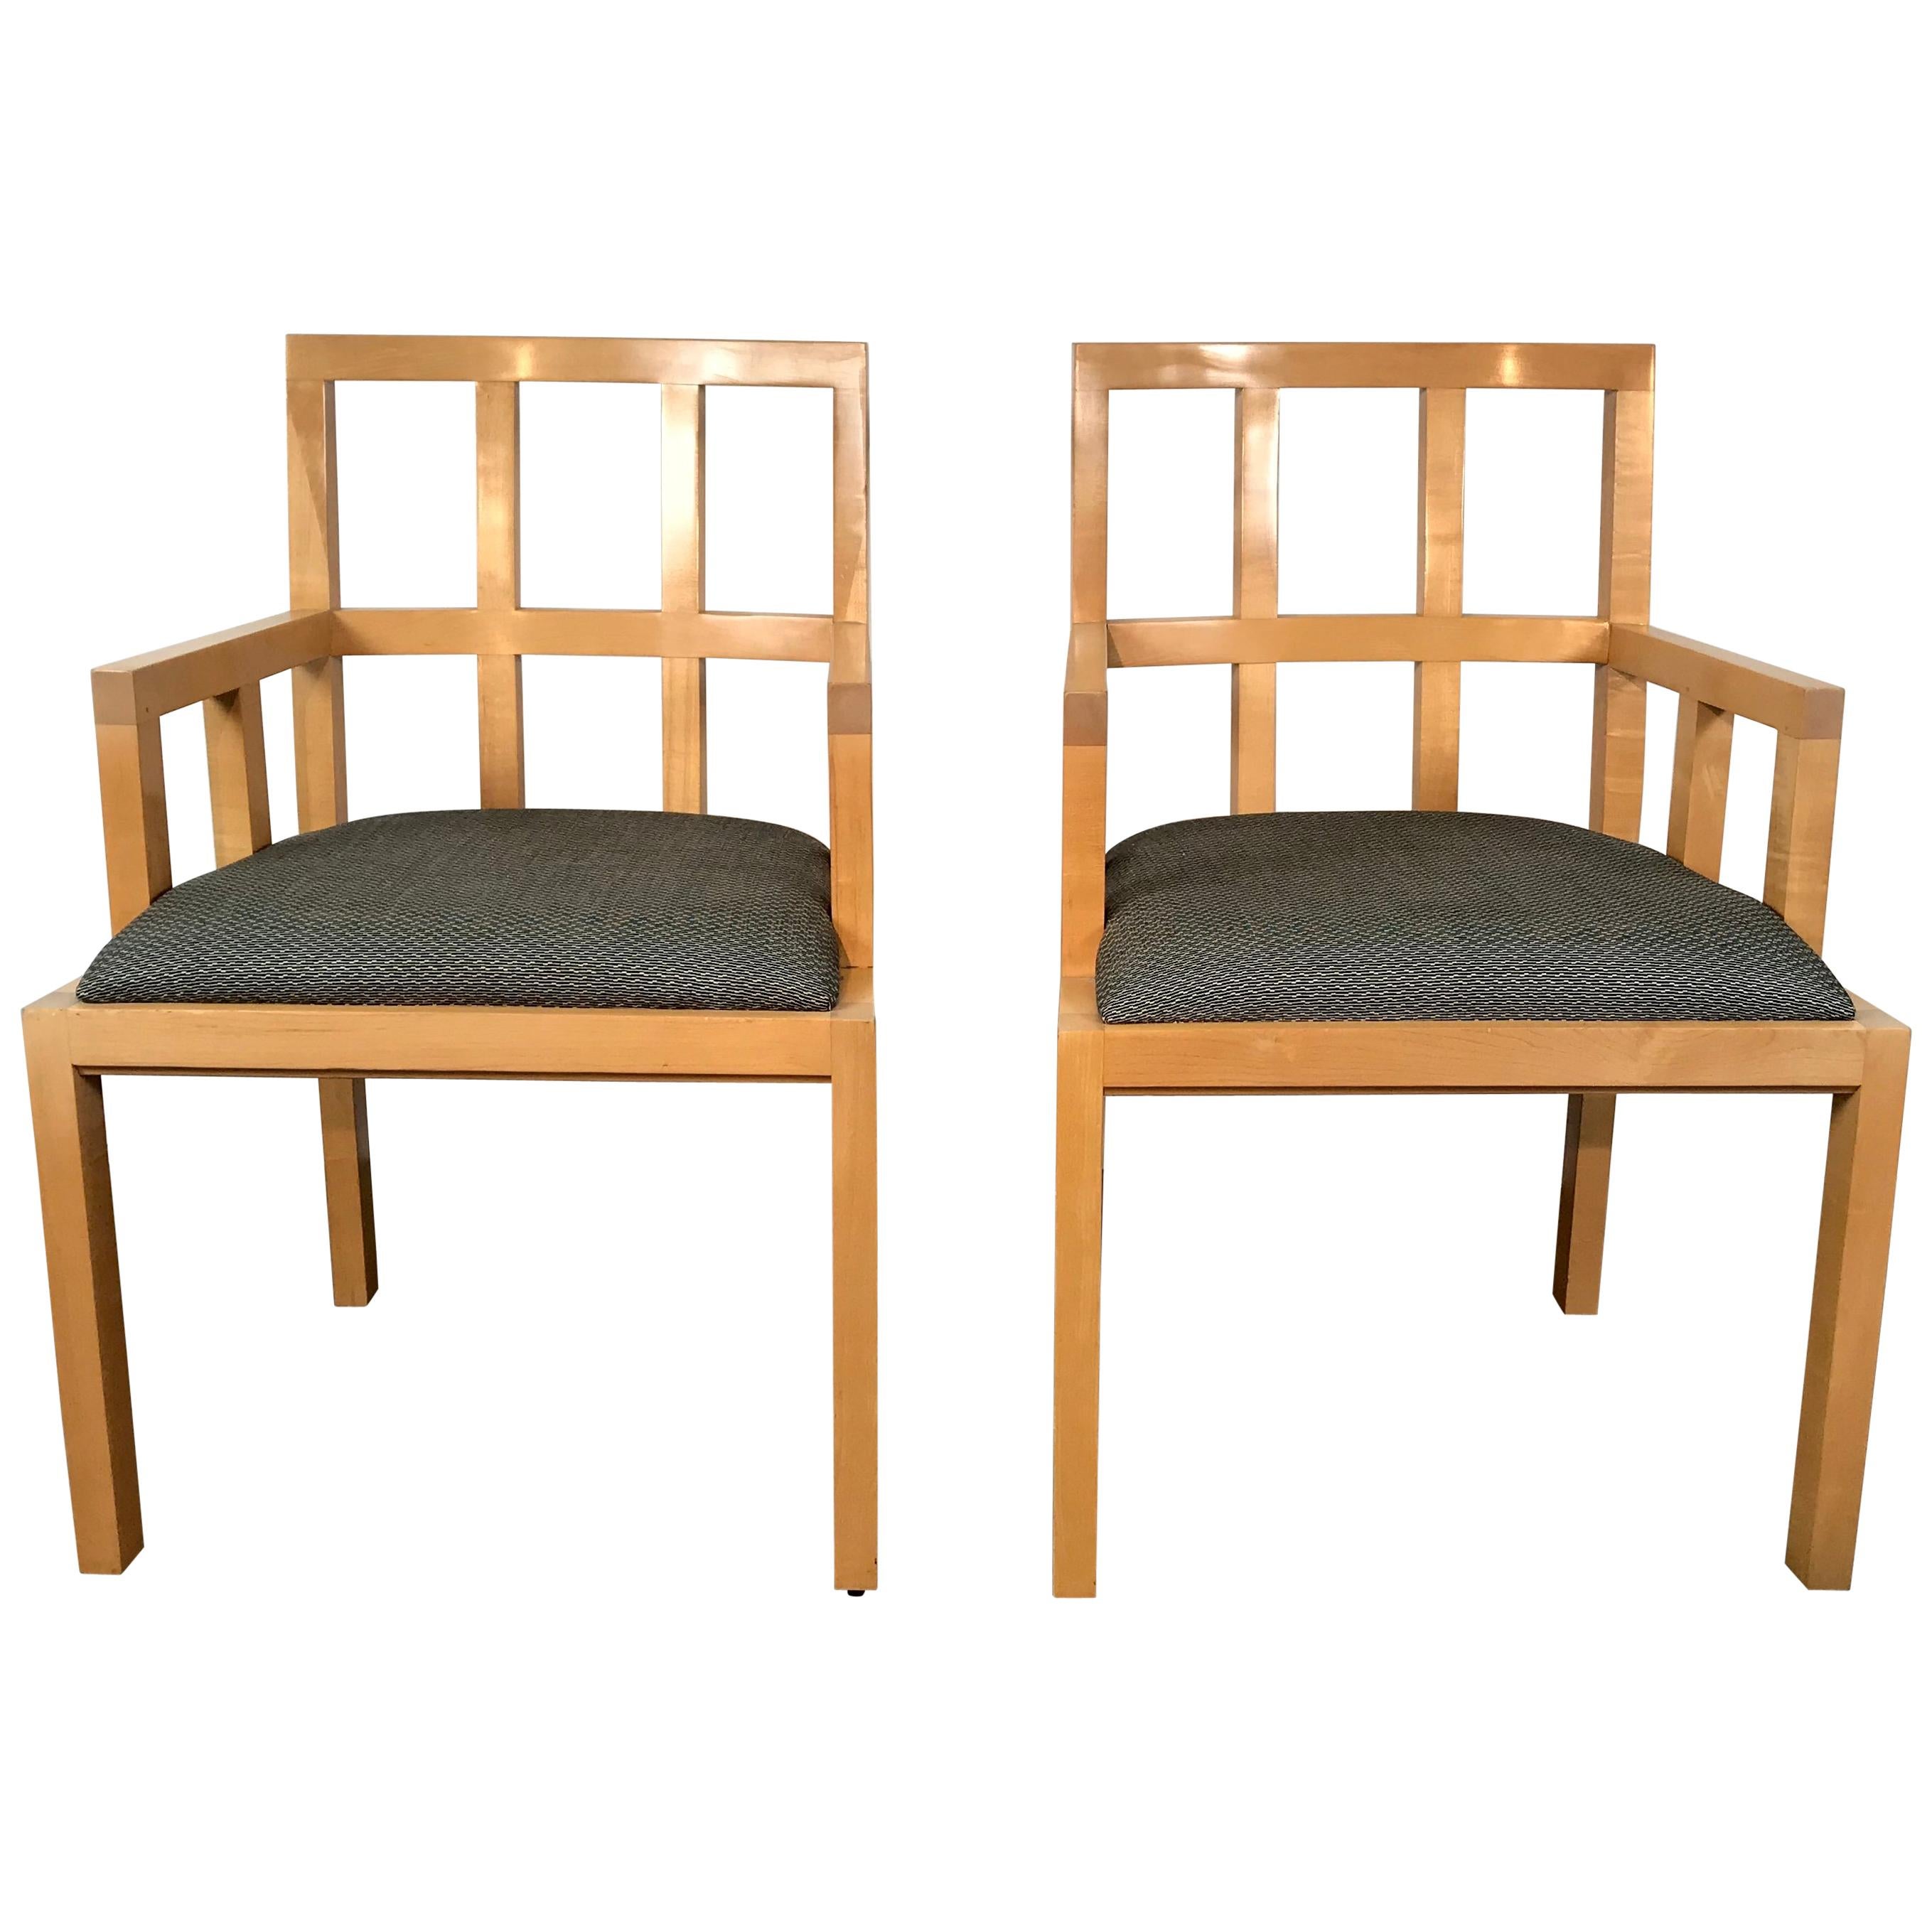 Stunning Pair of Contemporary Modern Birch Arm Chairs, Bernhardt Furniture Co. For Sale